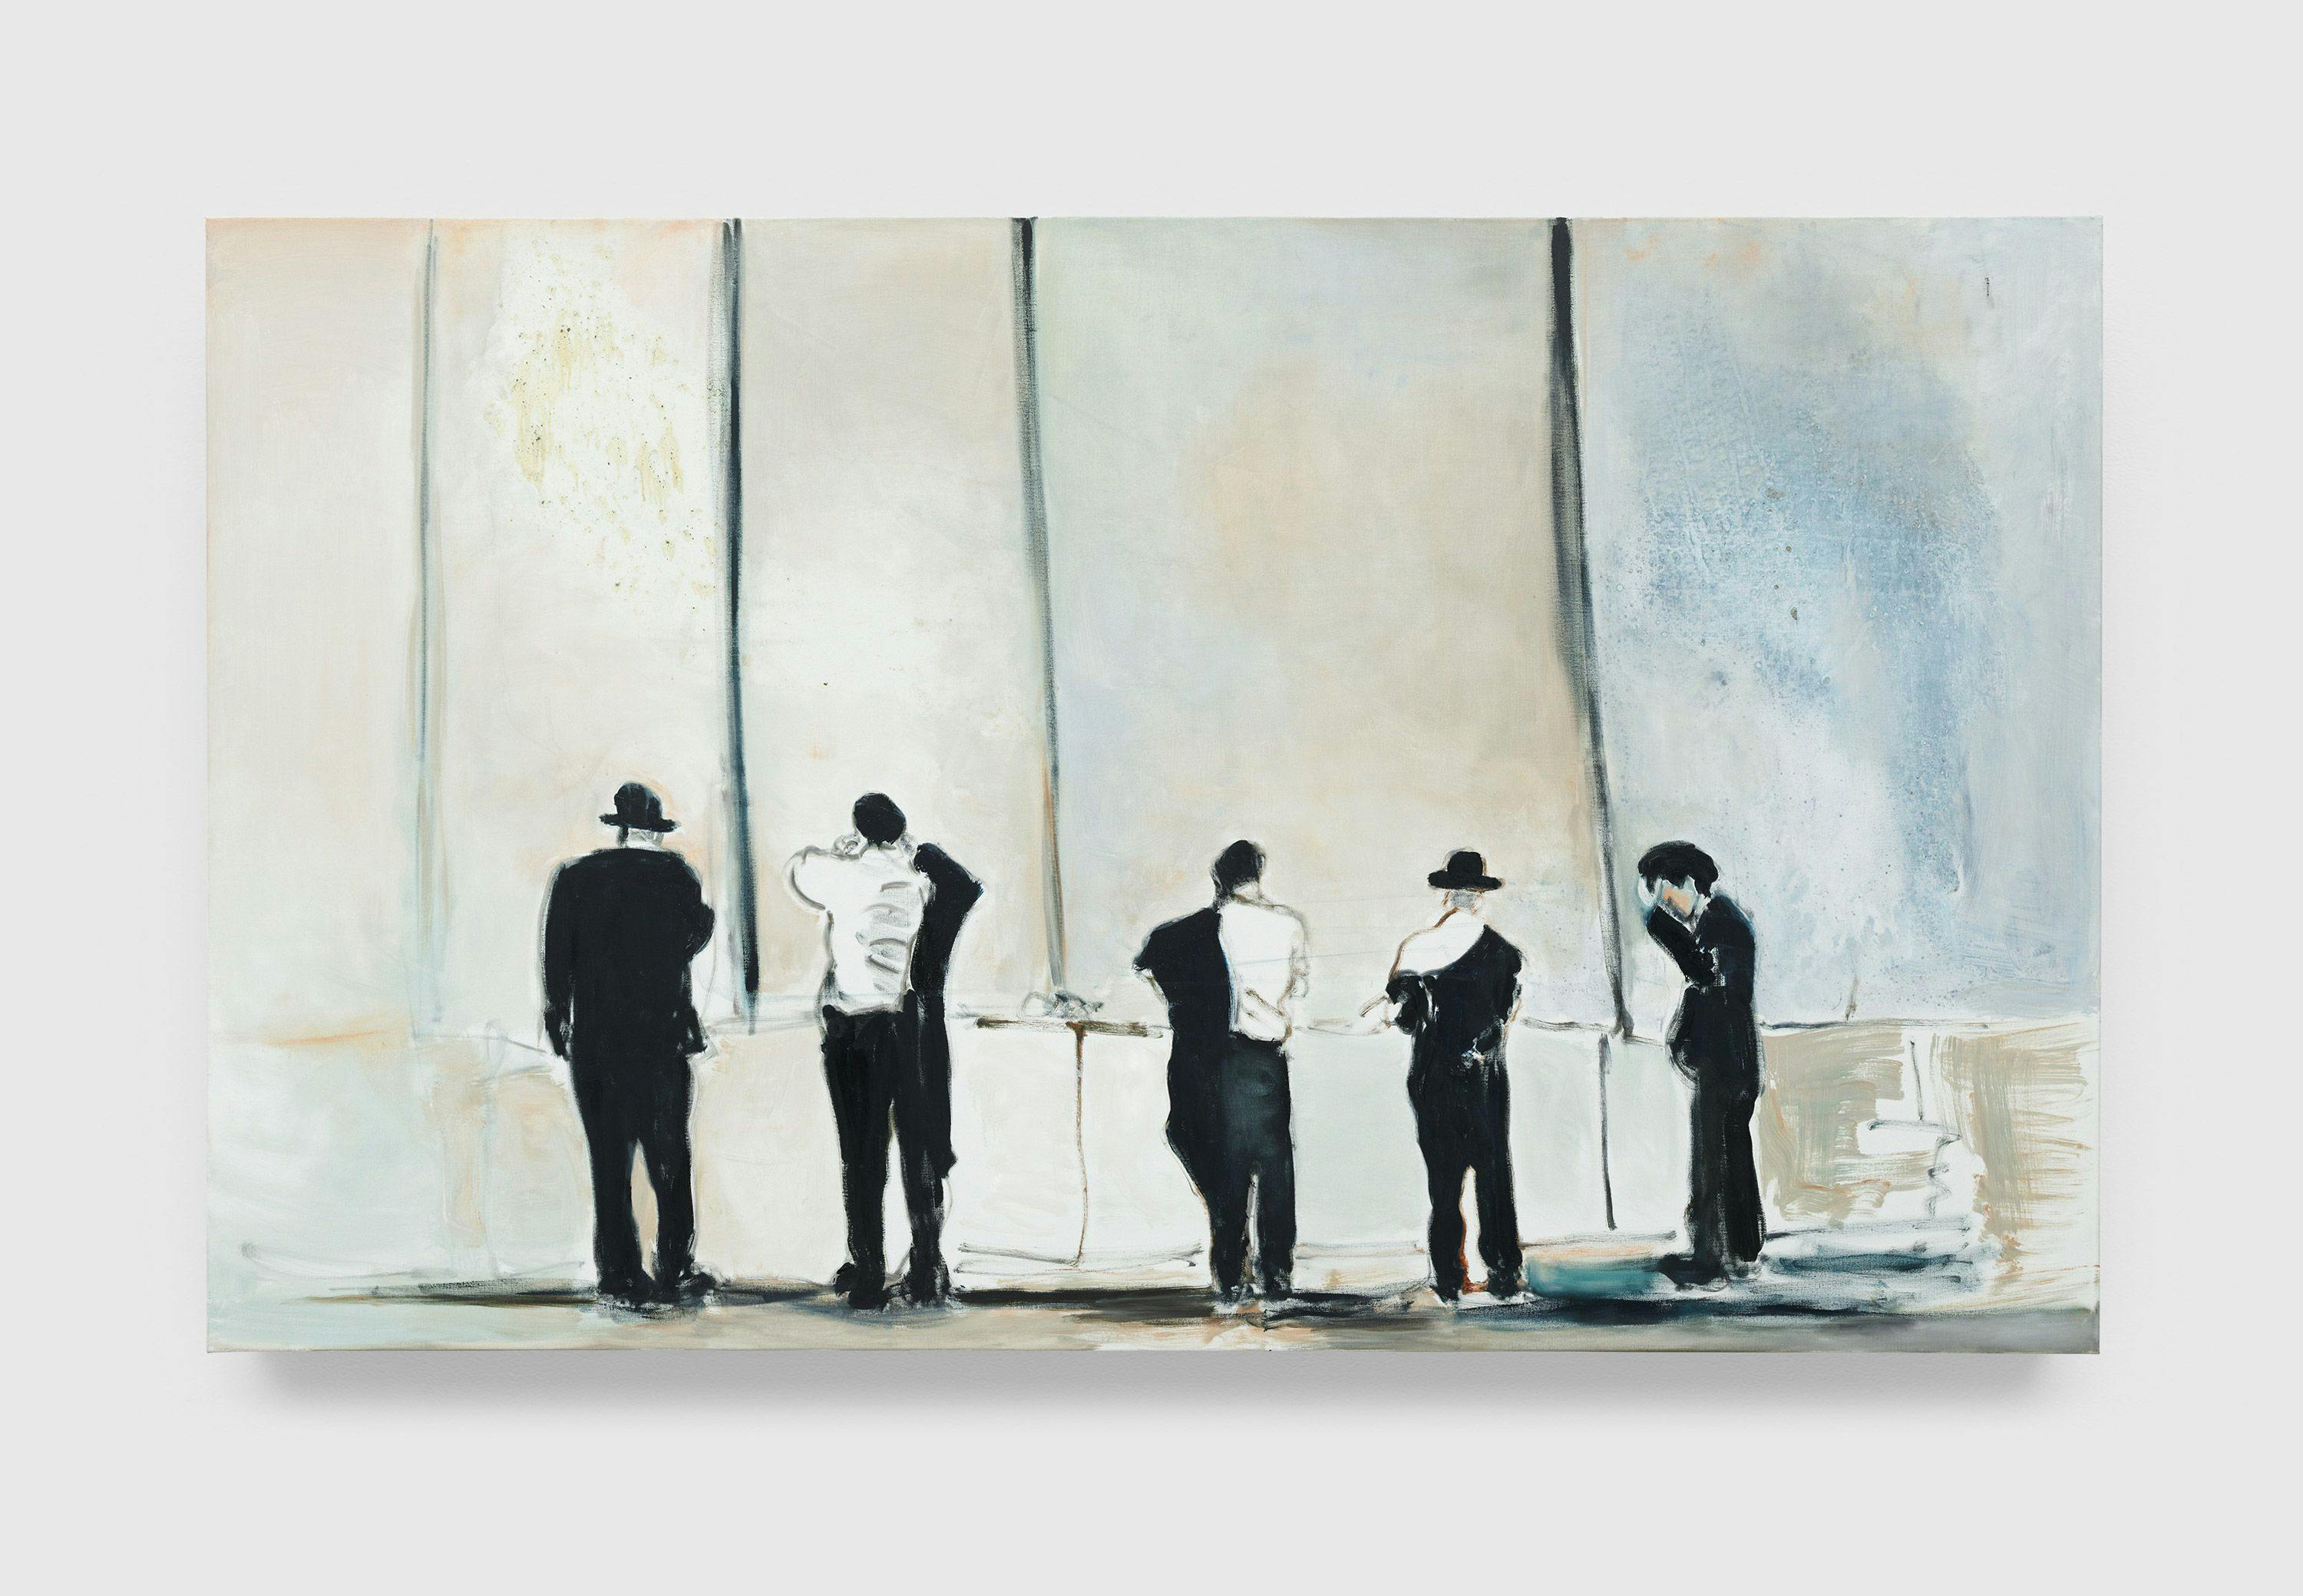 A painting by Marlene Dumas, titled The Wall, dated 2009.